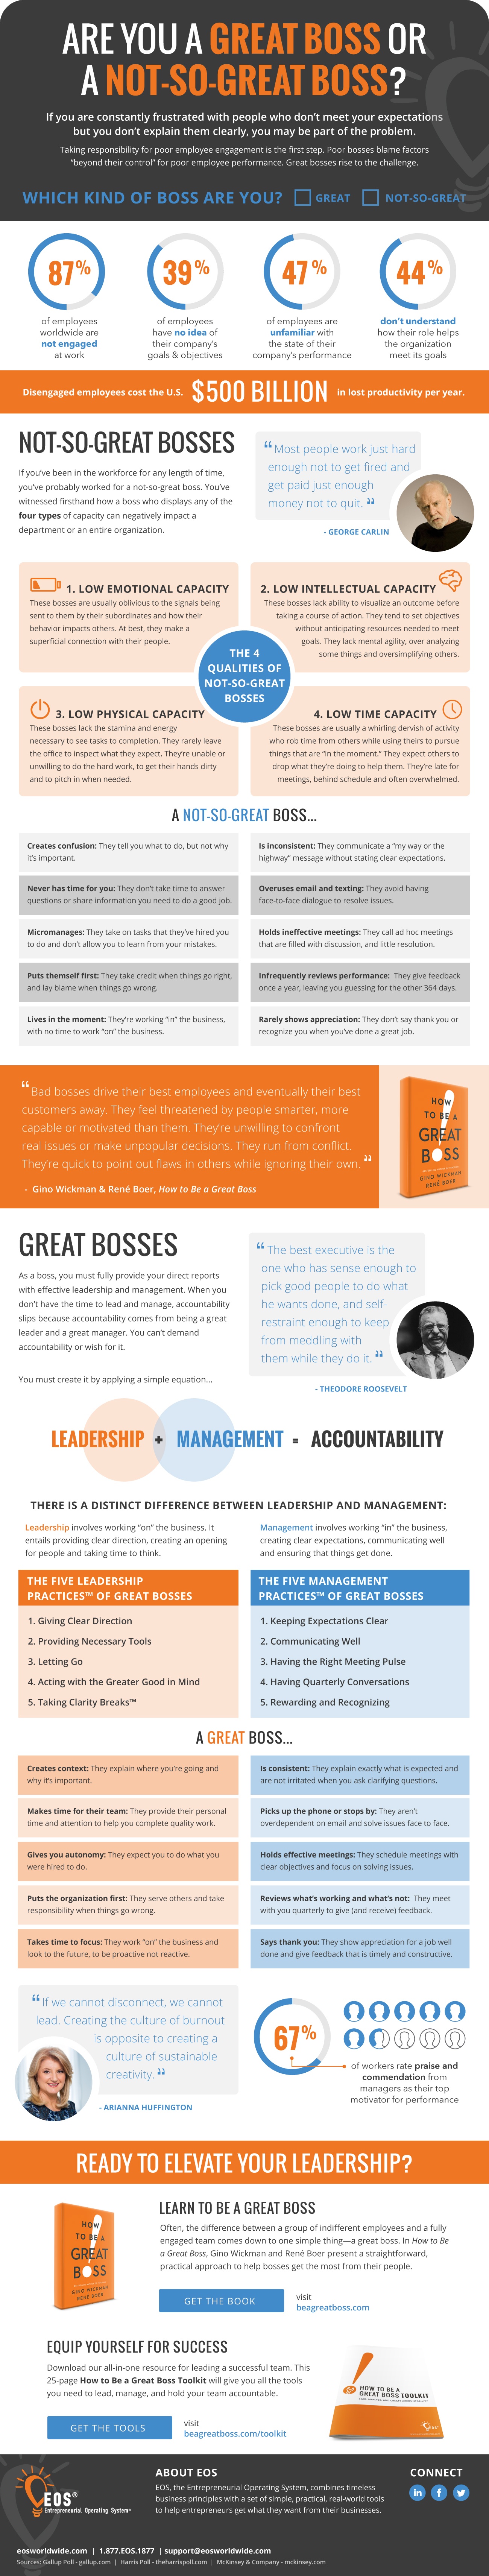 Are You a Great Boss or a Not-So-Great Boss?